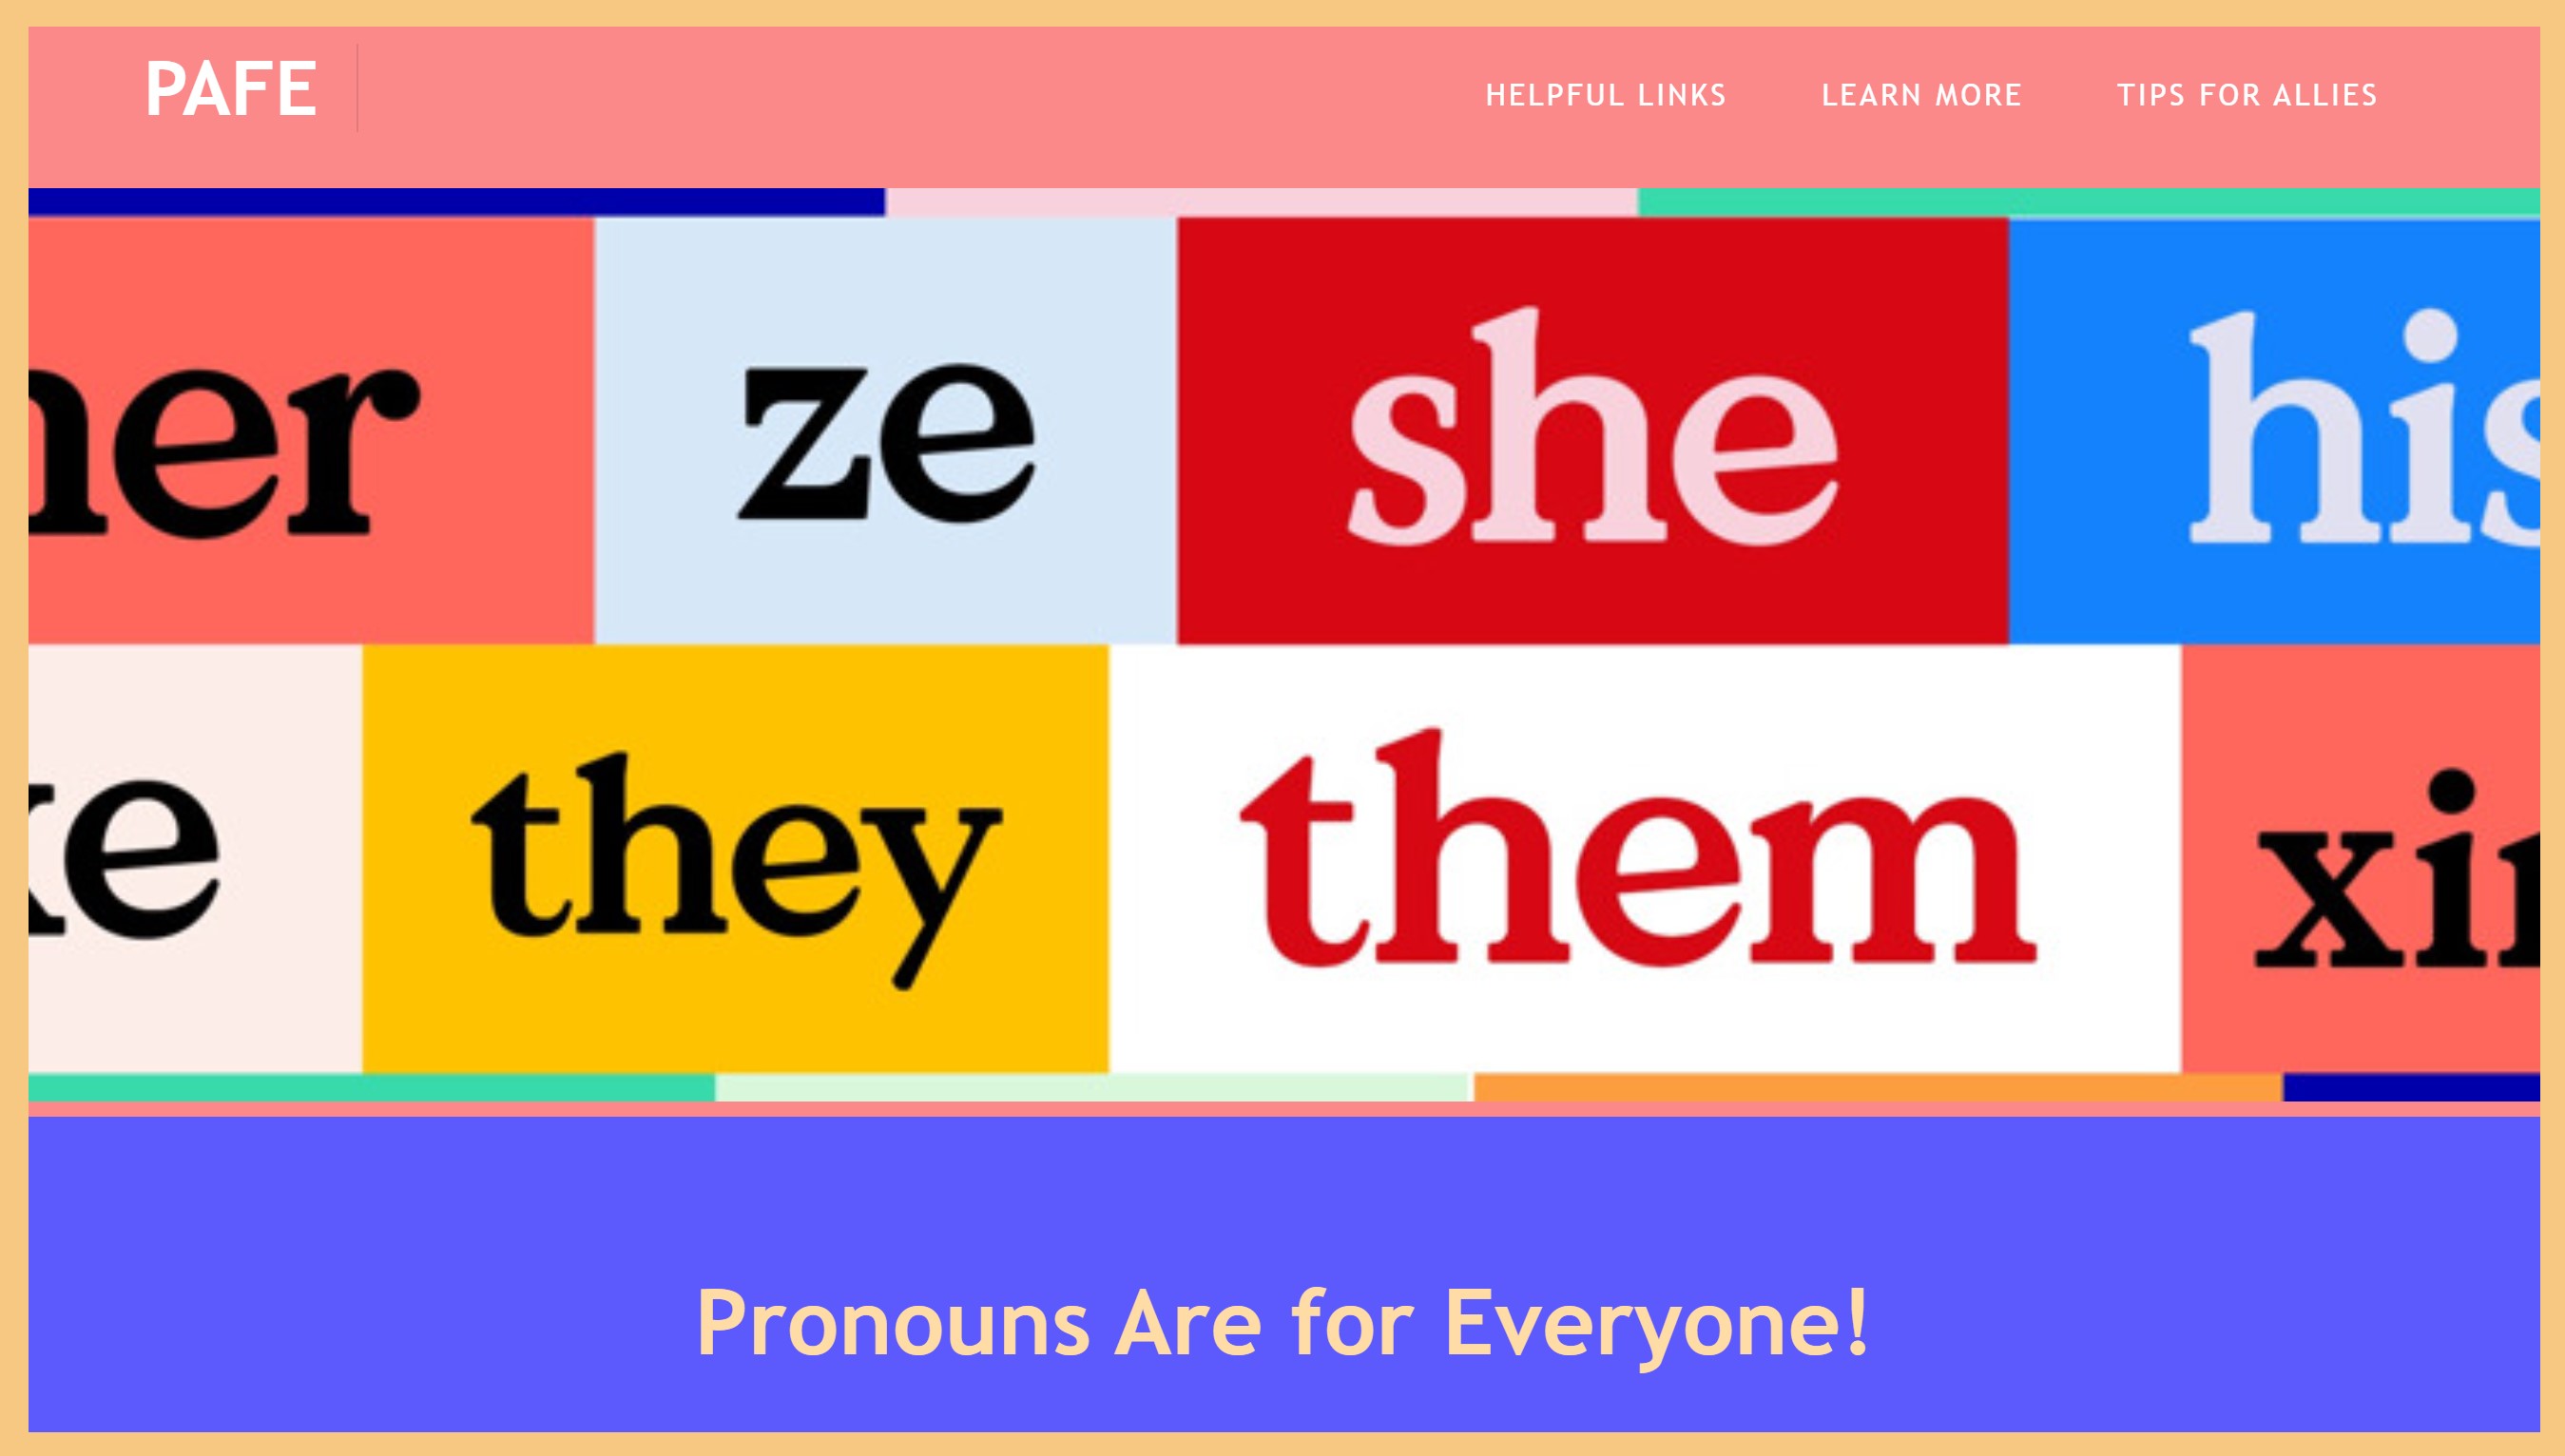 PAFE: Pronouns Are for Everyone